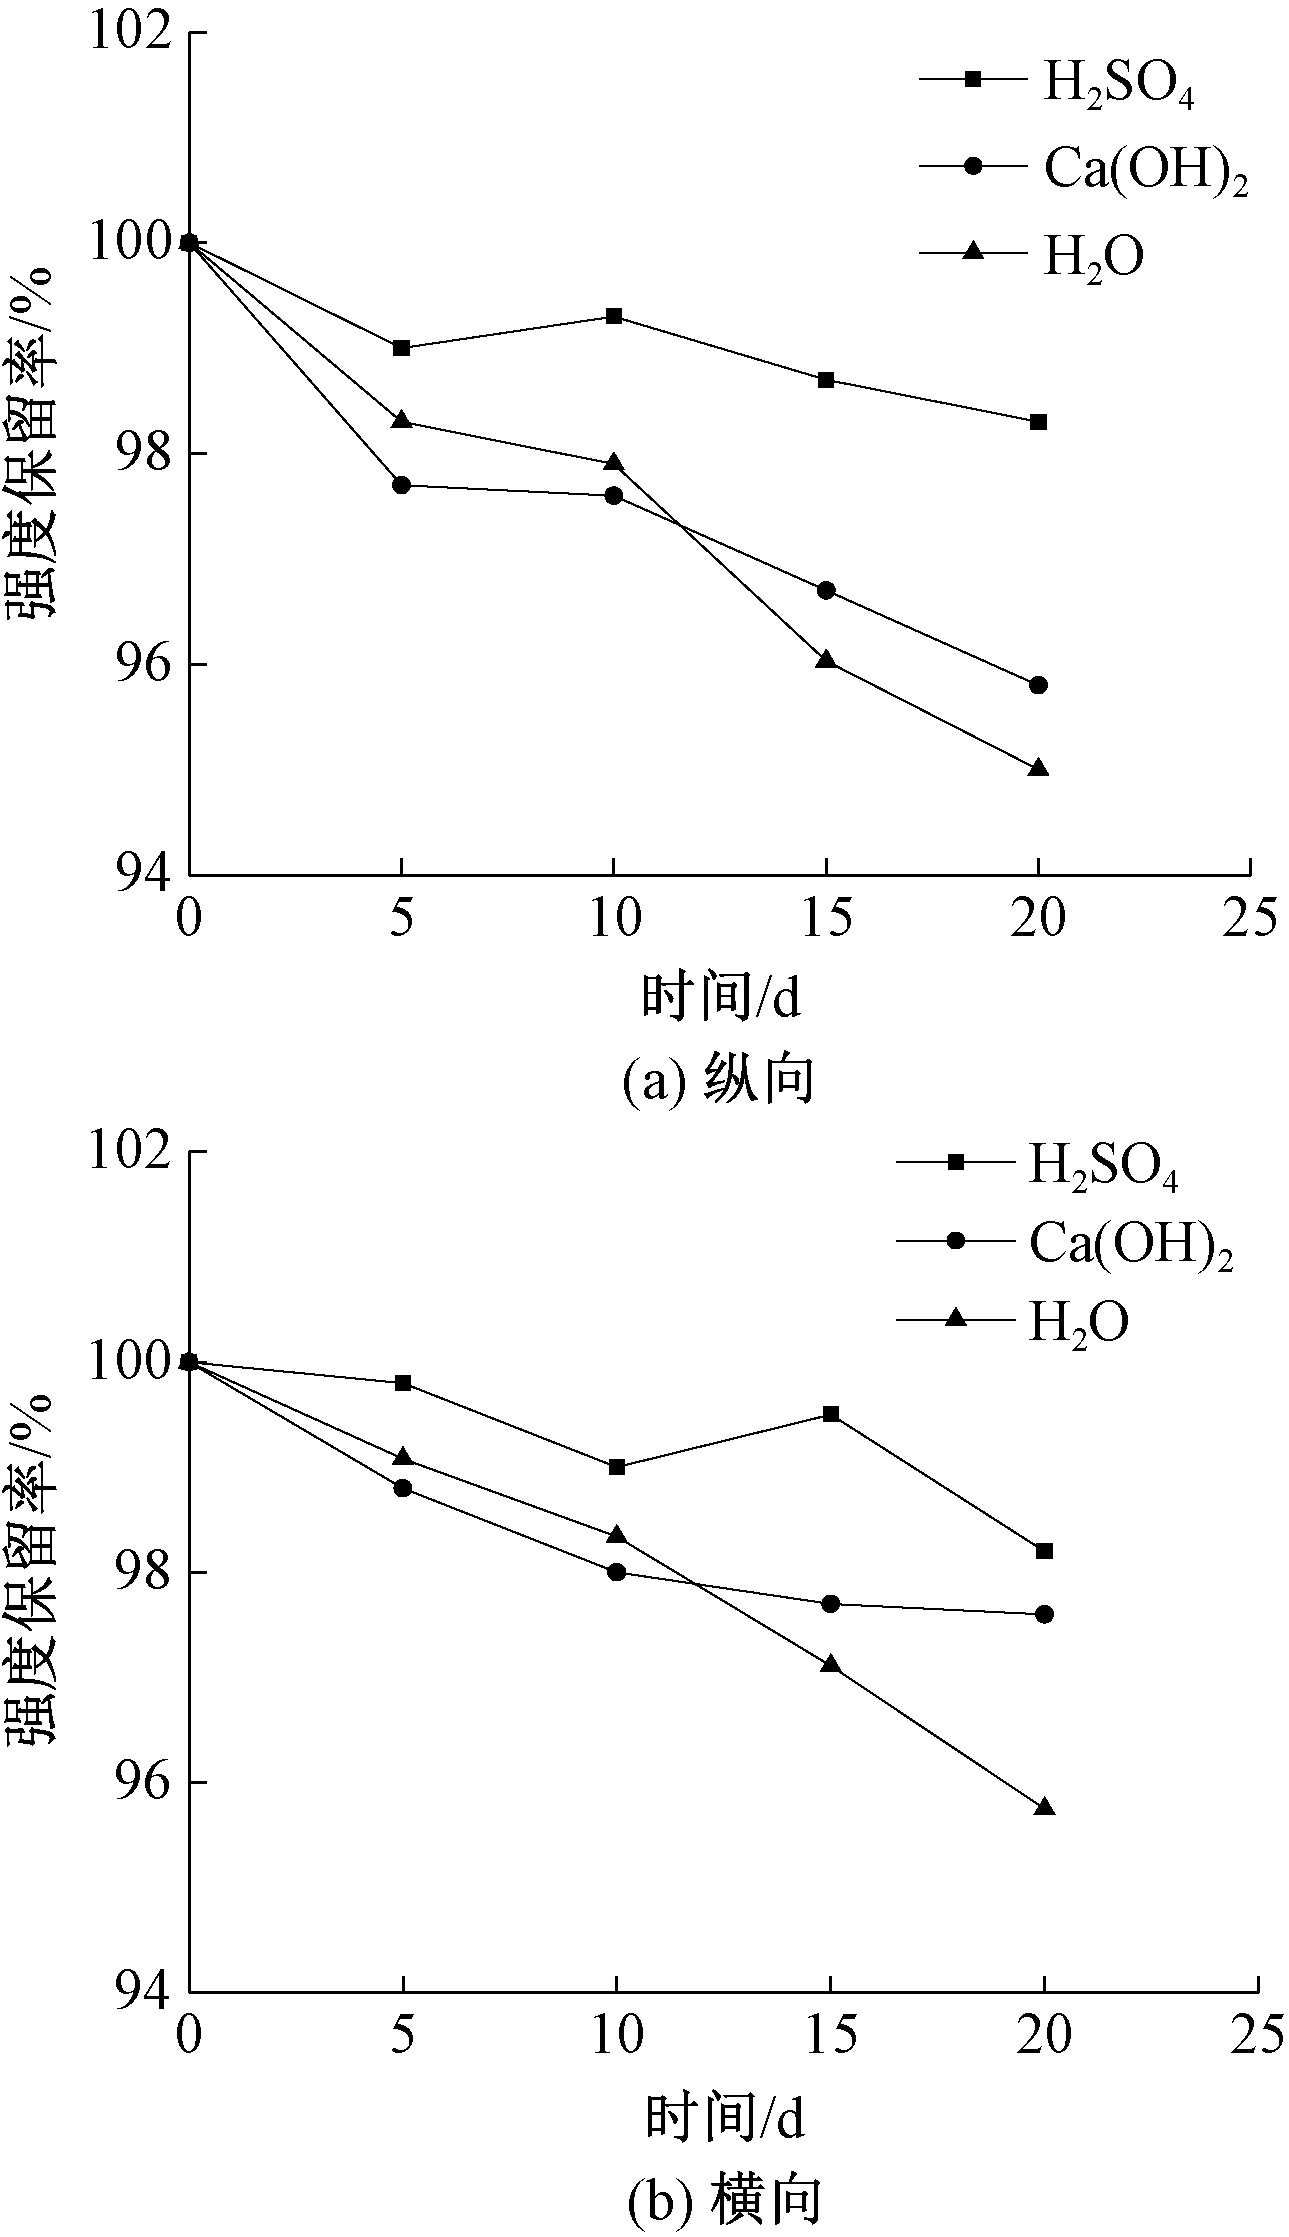 Curves of longitudinal (a) and lateral (b) breaking strength retention rate and time of HPP geotextiles